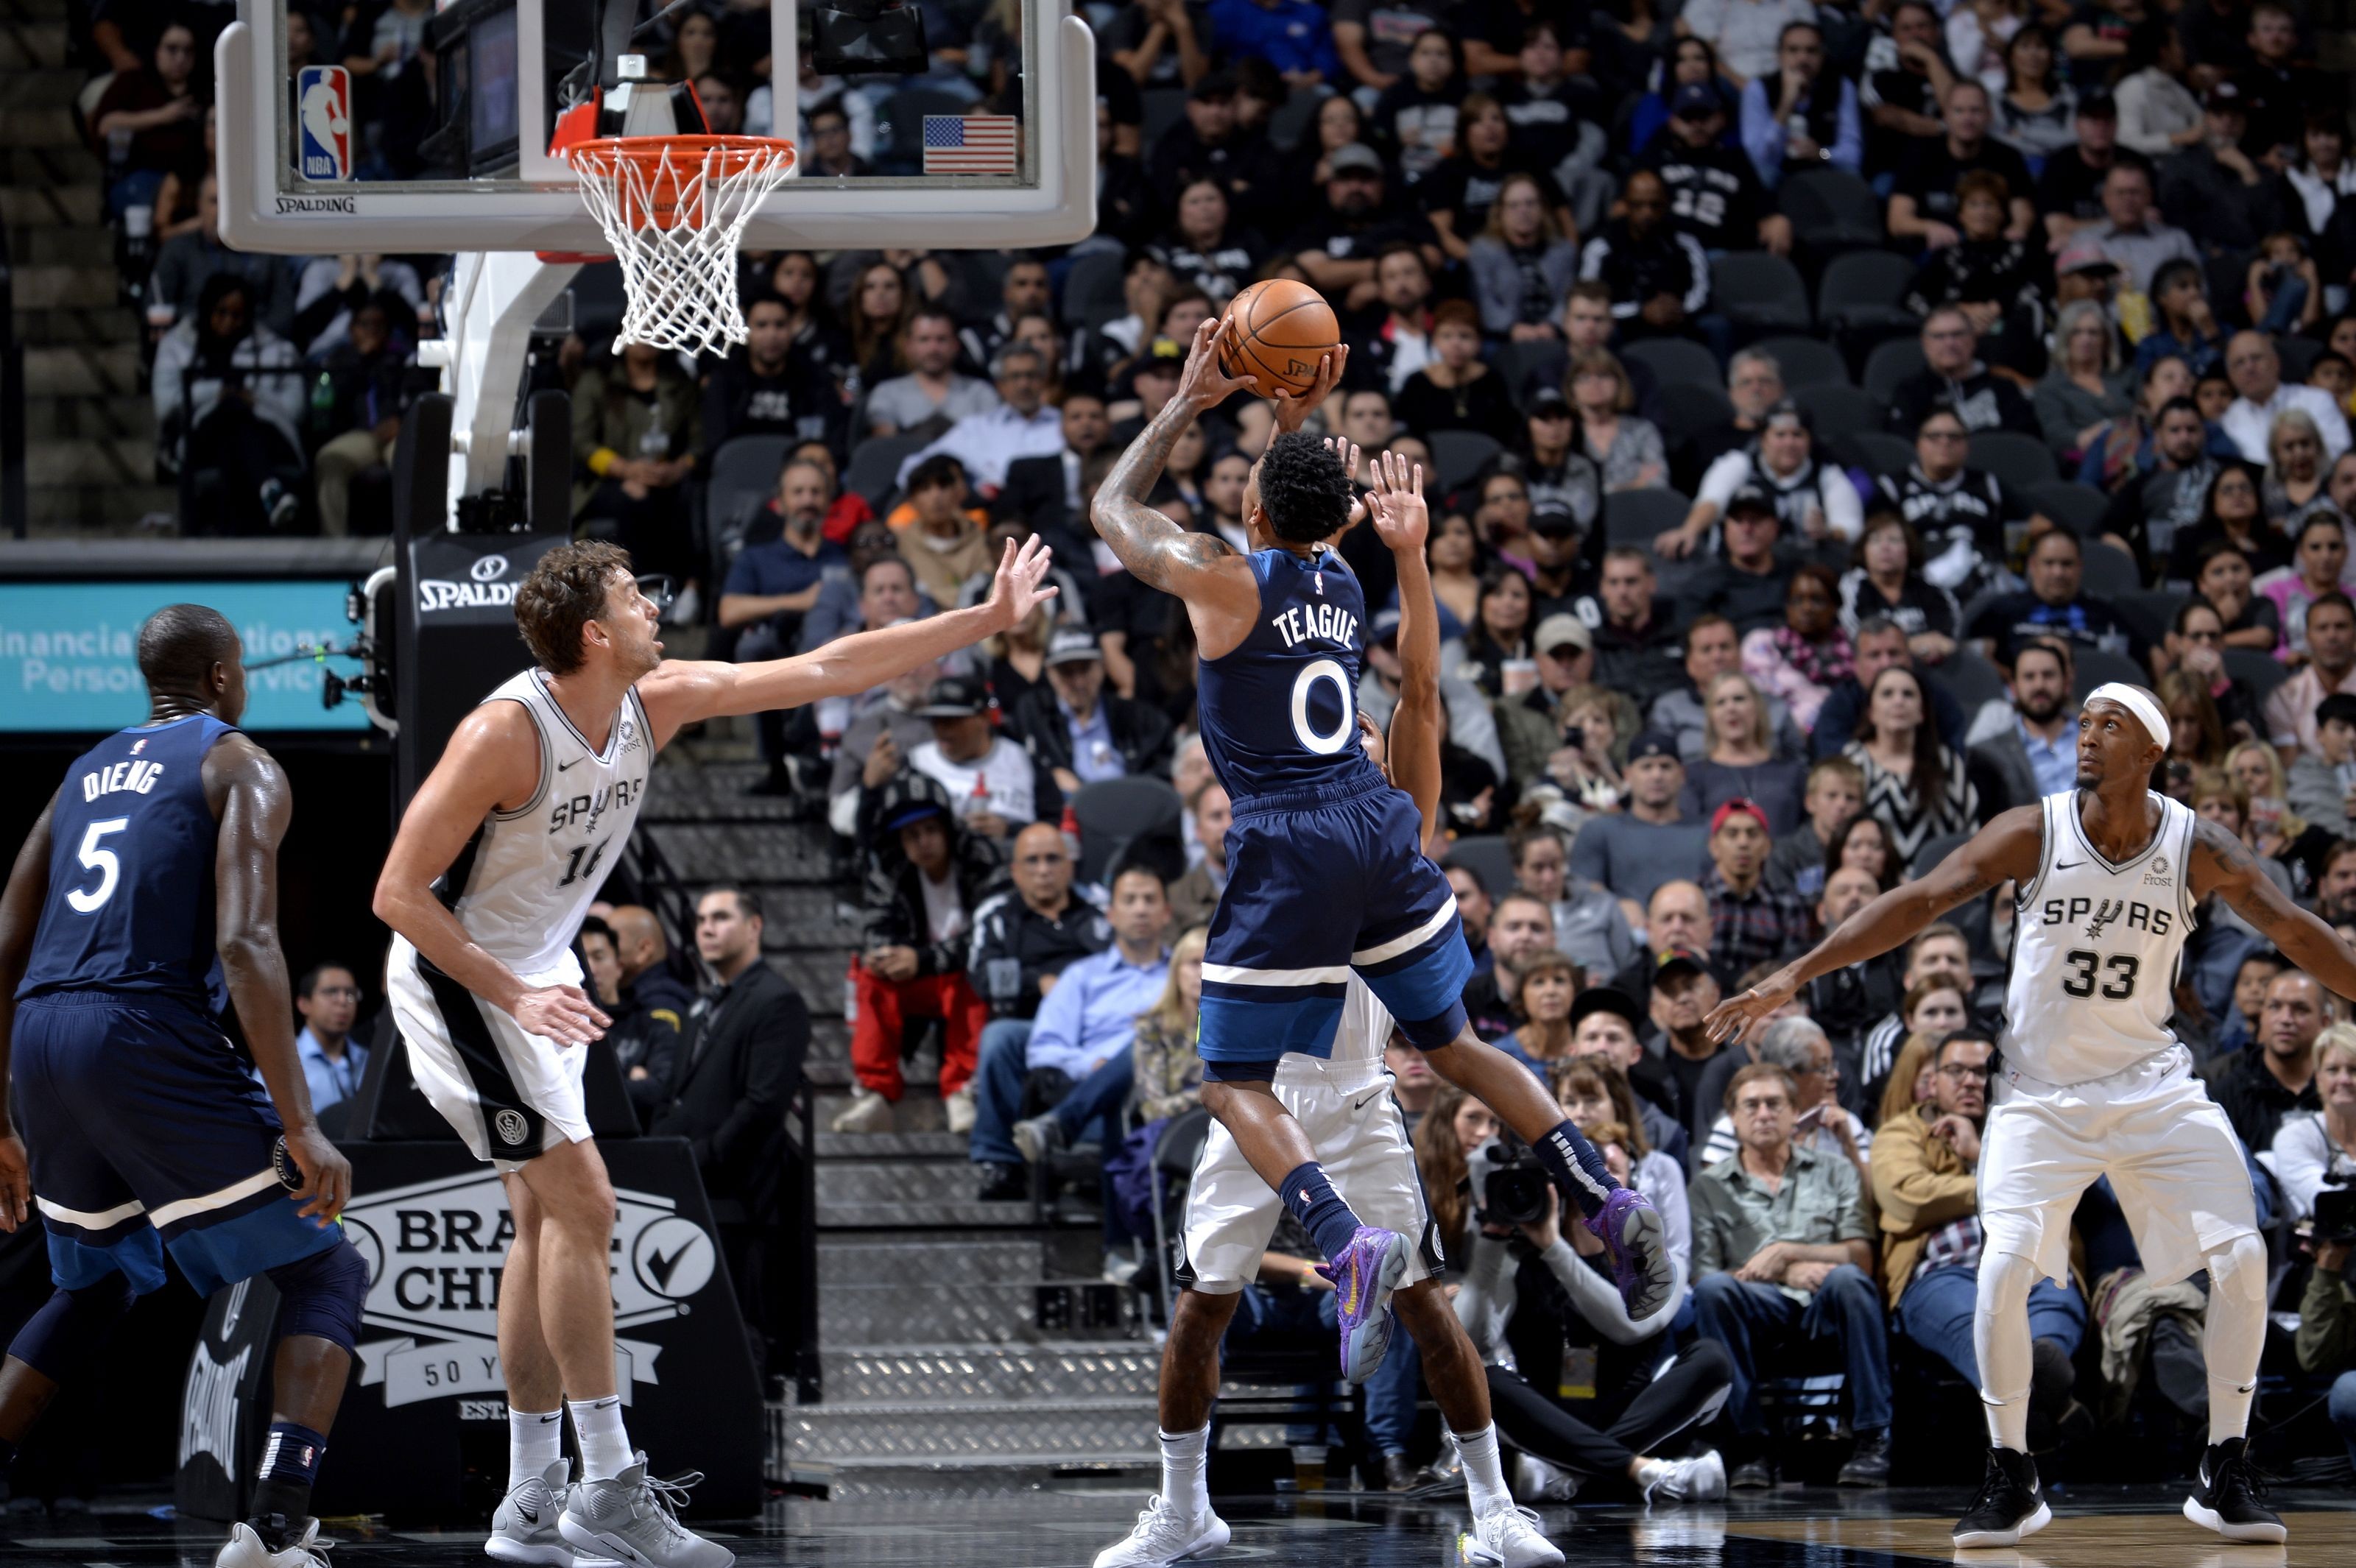 Minnesota Timberwolves 3 takeaways from opening night loss to Spurs